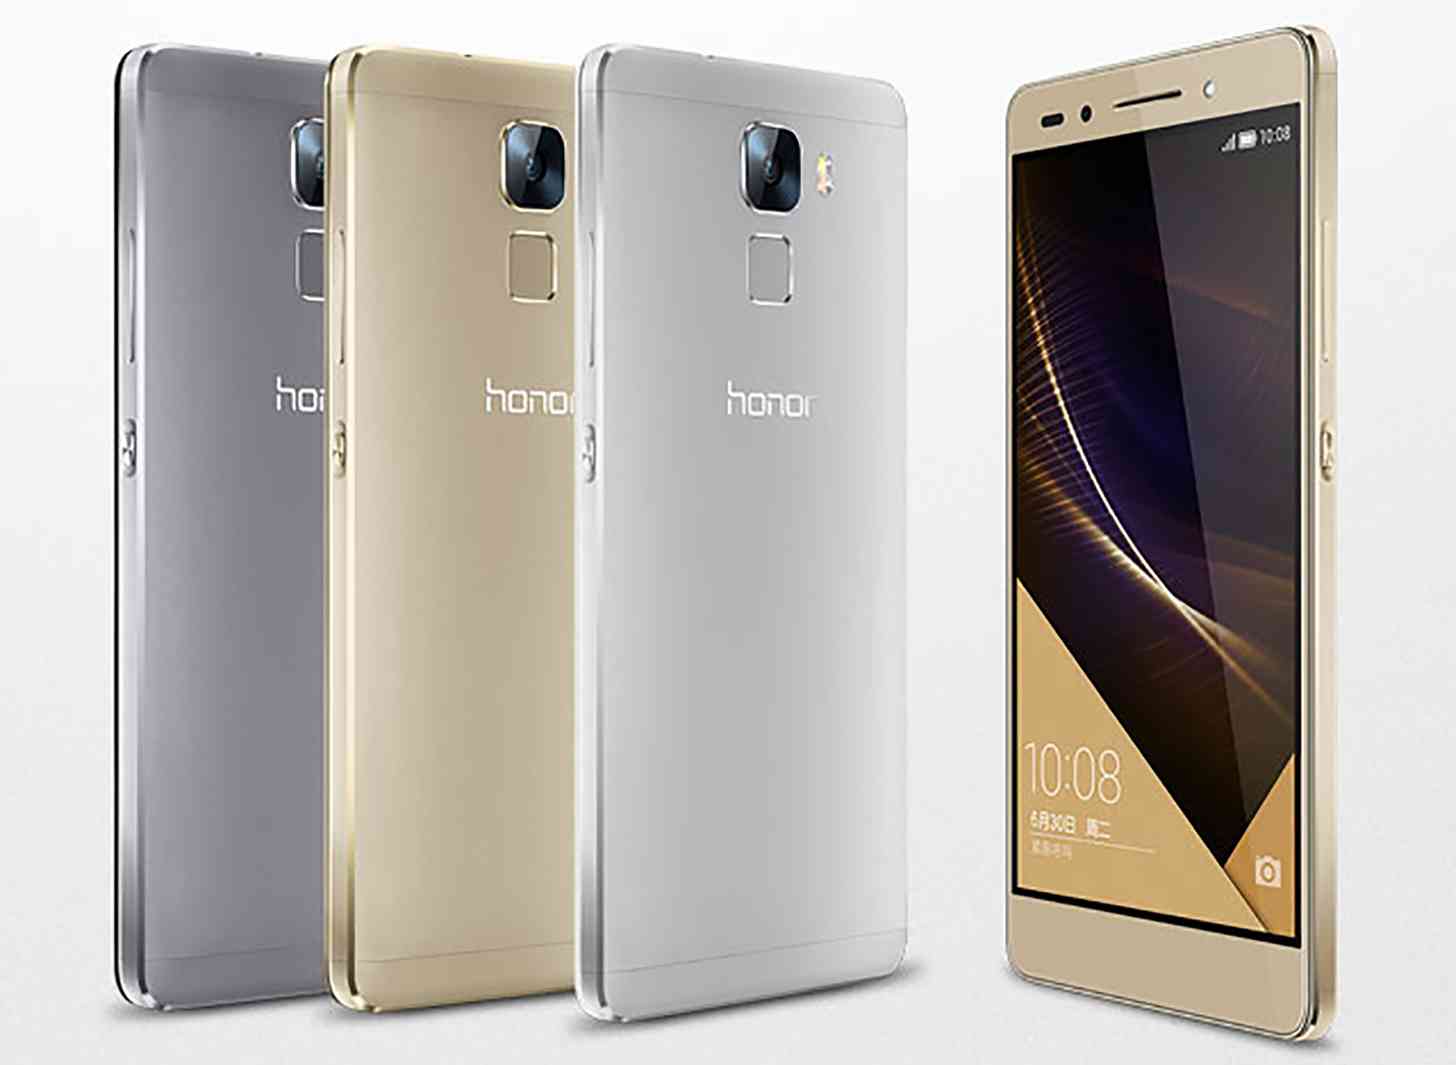 Huawei Honor 7 colors large